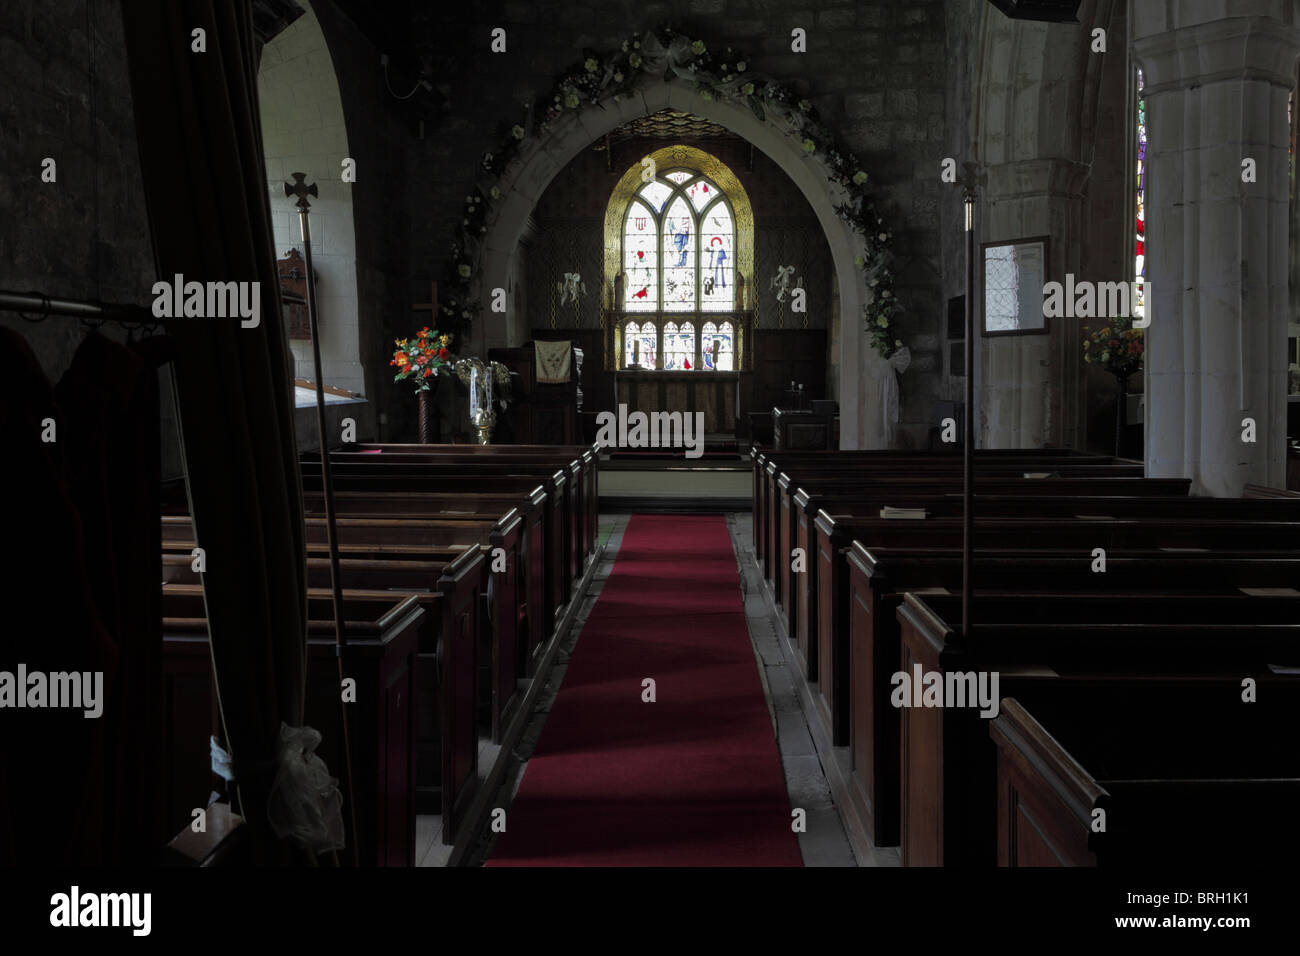 Internal features and artefact which relate to St Bartholemews Church in Moreton Corbet, Shropshire, England. Stock Photo